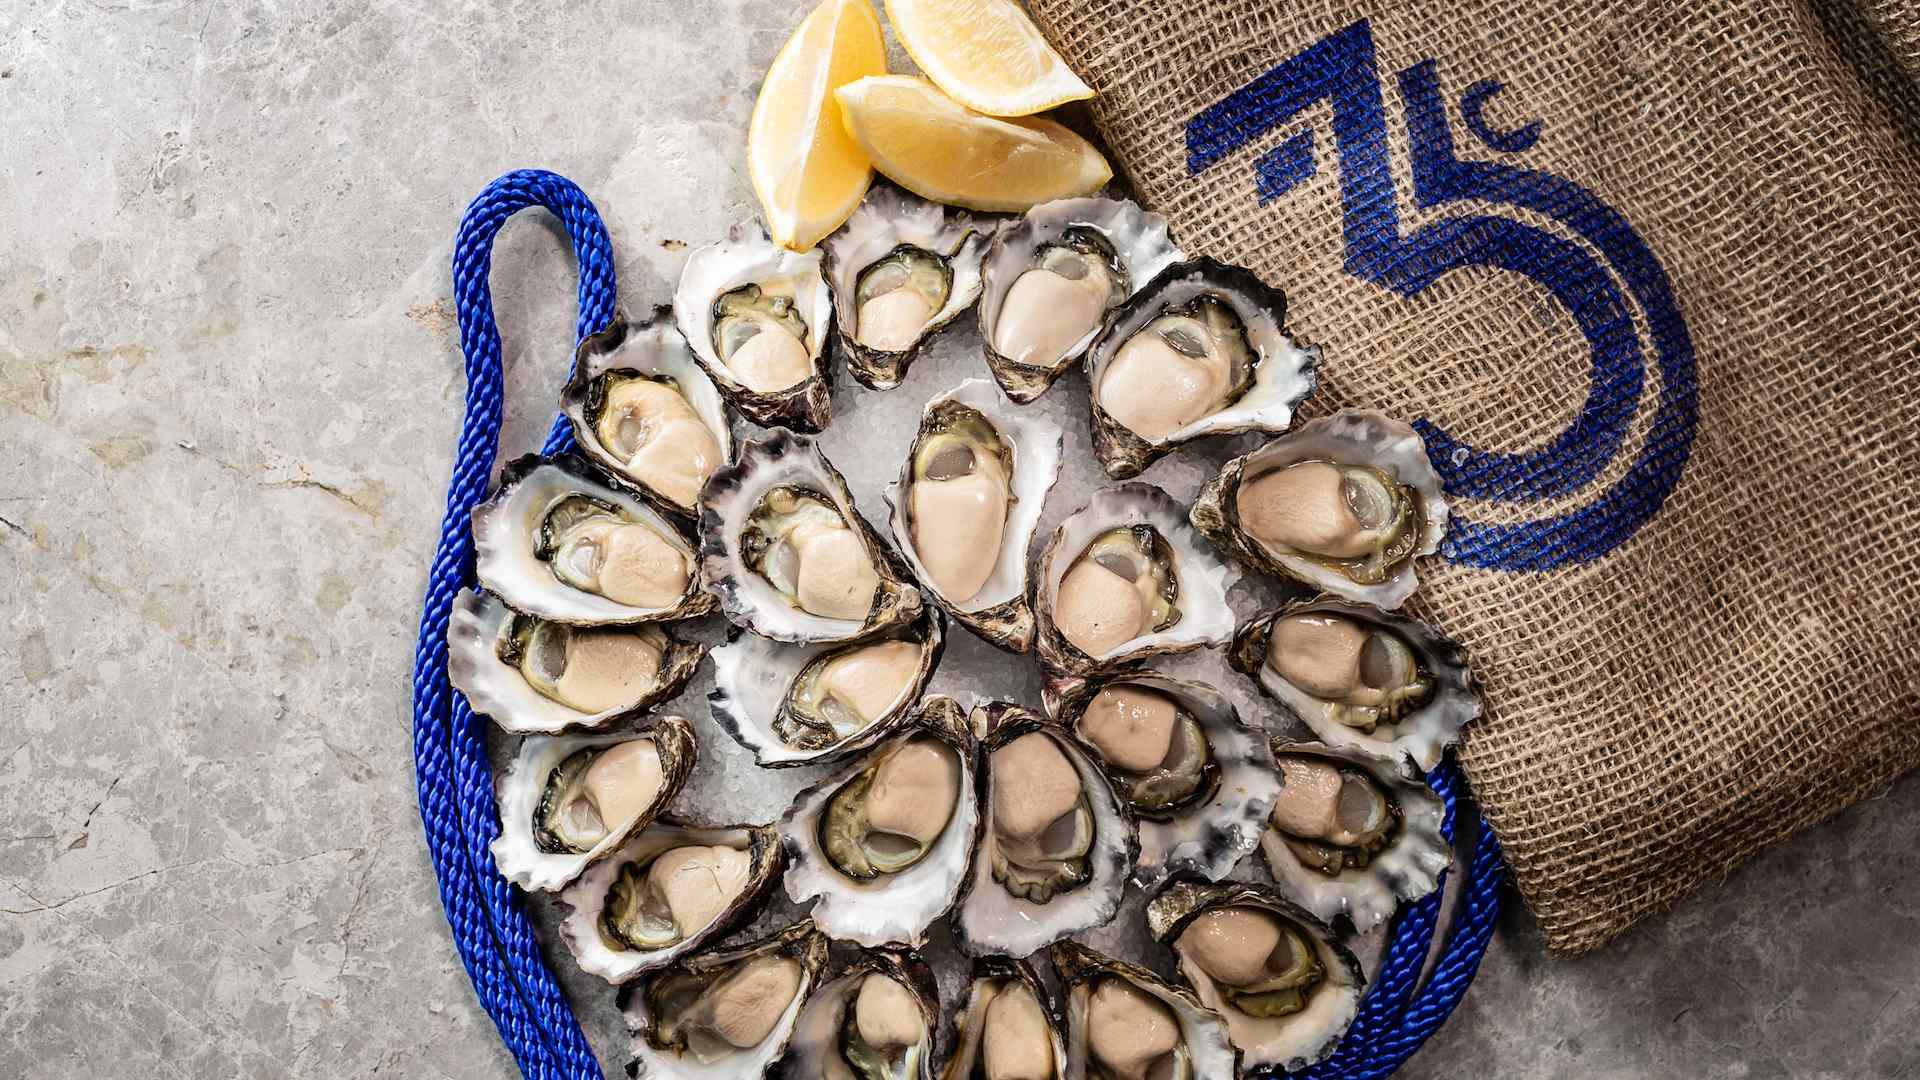 East 33 Is Melbourne's New Home-Delivery Service Dropping A-Class Oysters to Your Doorstep